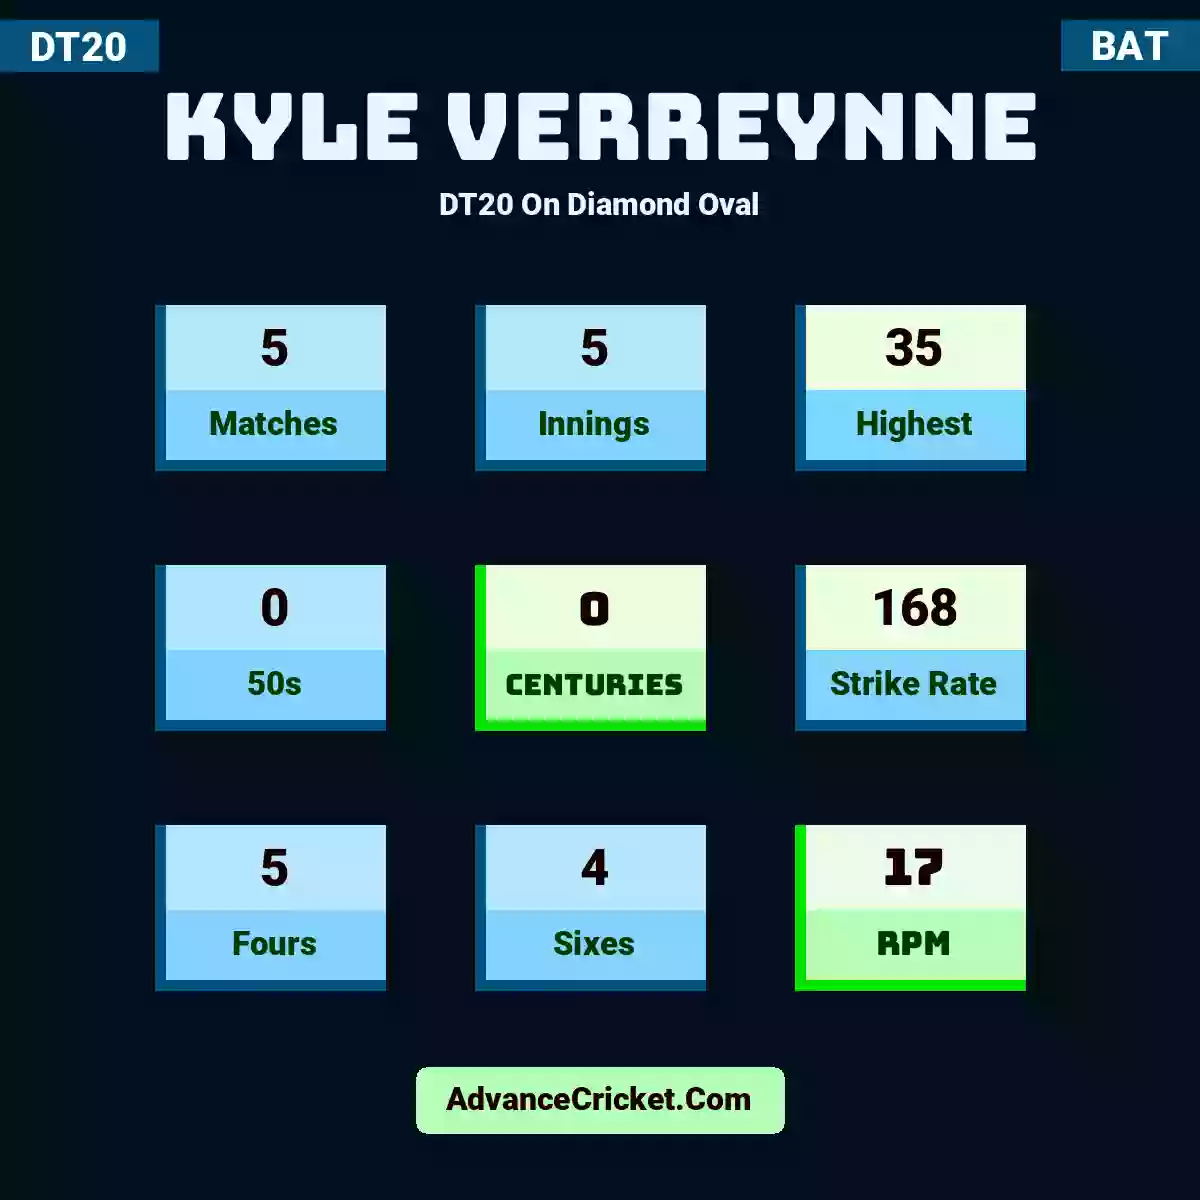 Kyle Verreynne DT20  On Diamond Oval, Kyle Verreynne played 5 matches, scored 35 runs as highest, 0 half-centuries, and 0 centuries, with a strike rate of 168. K.Verreynne hit 5 fours and 4 sixes, with an RPM of 17.